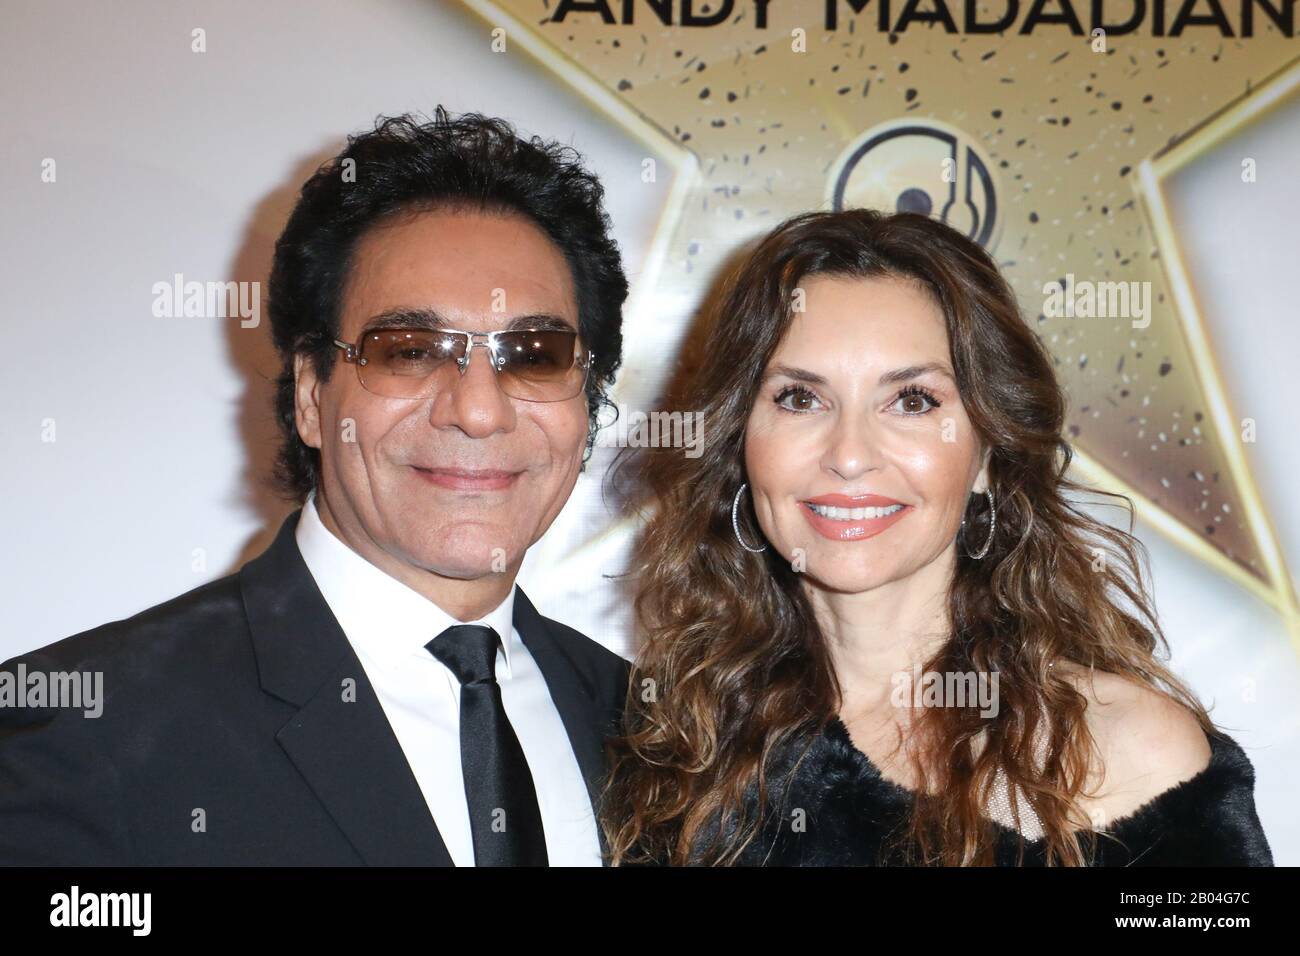 Andy Madadian Walk of Fame Star After Party at the Hollywood Museum in Hollywood, California on January 17, 2020 Featuring: Andy Madadian, Shani Rigsbee Where: Hollywood, California, United States When: 17 Jan 2020 Credit: Sheri Determan/WENN.com Stock Photo